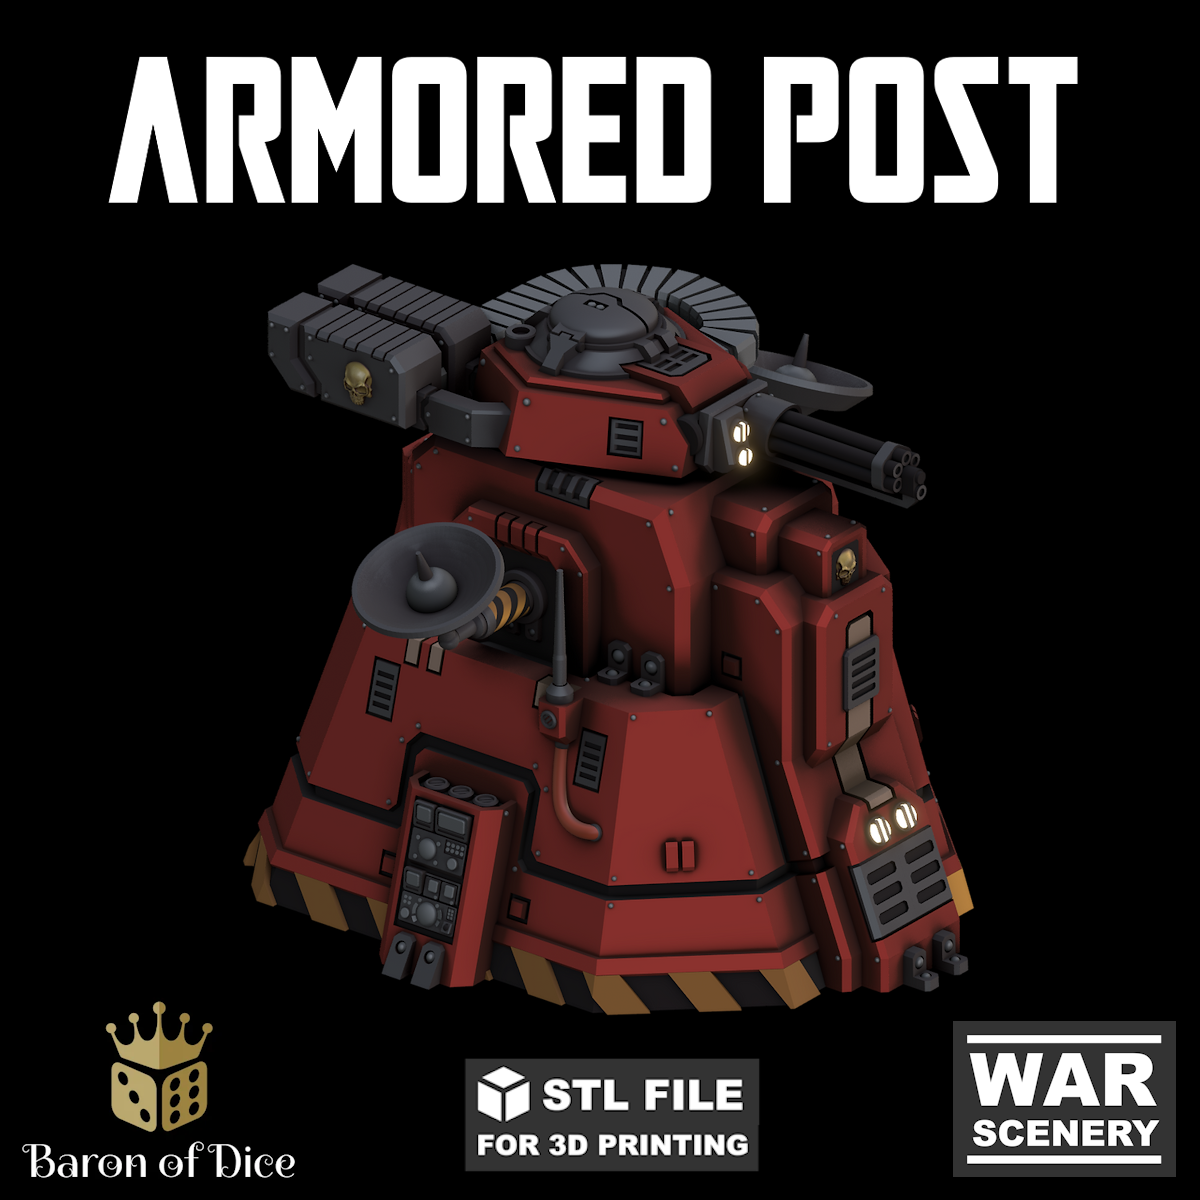 Chapter Armored Post, STL File